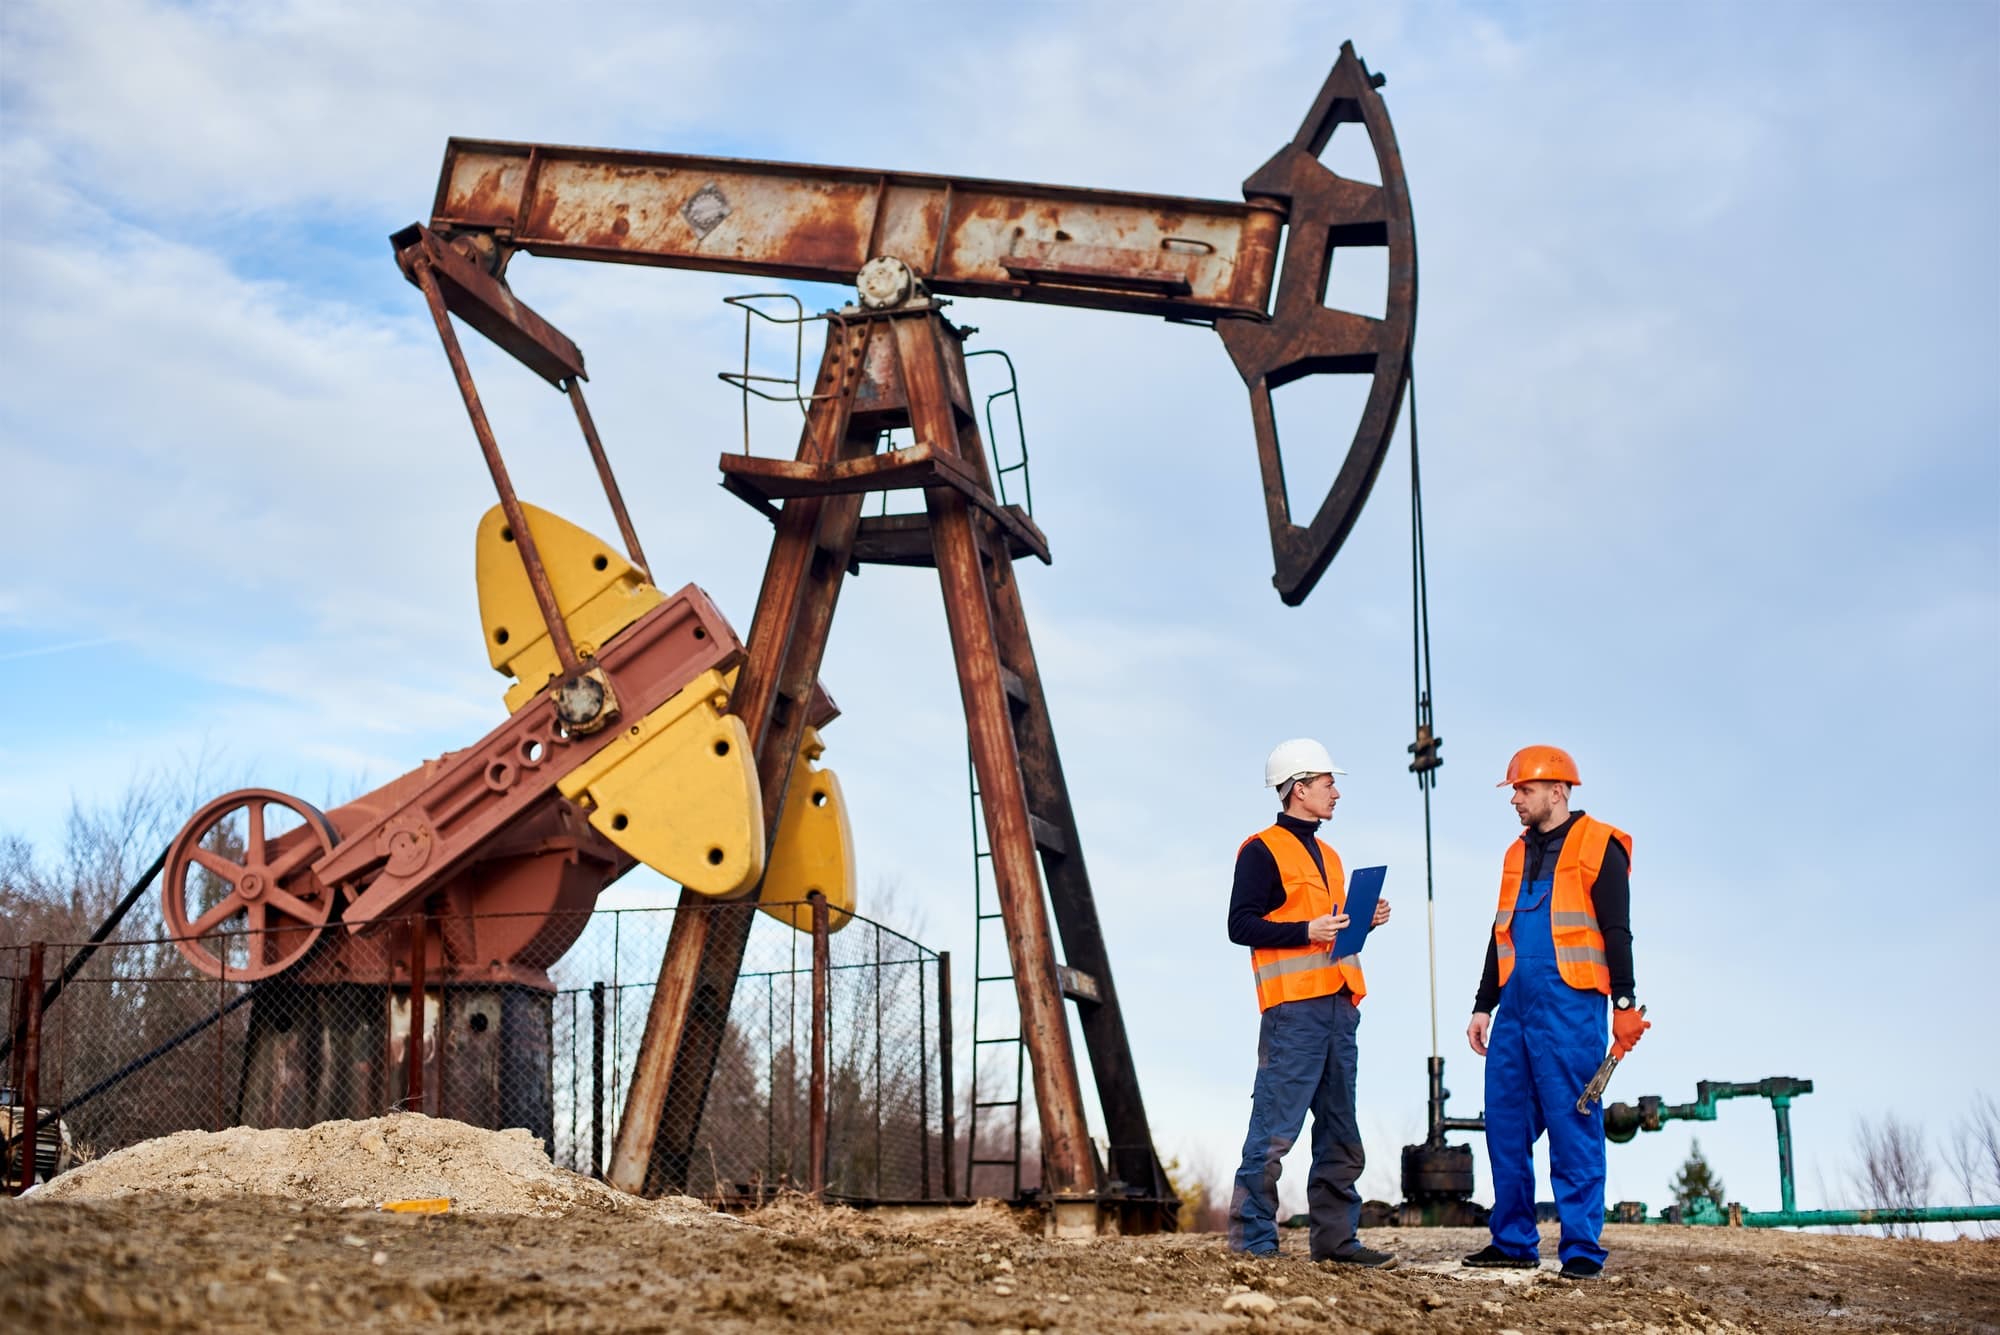 PelicanSoft - Two workers standing in front of an oil pump, performing database administration for EvalPro.